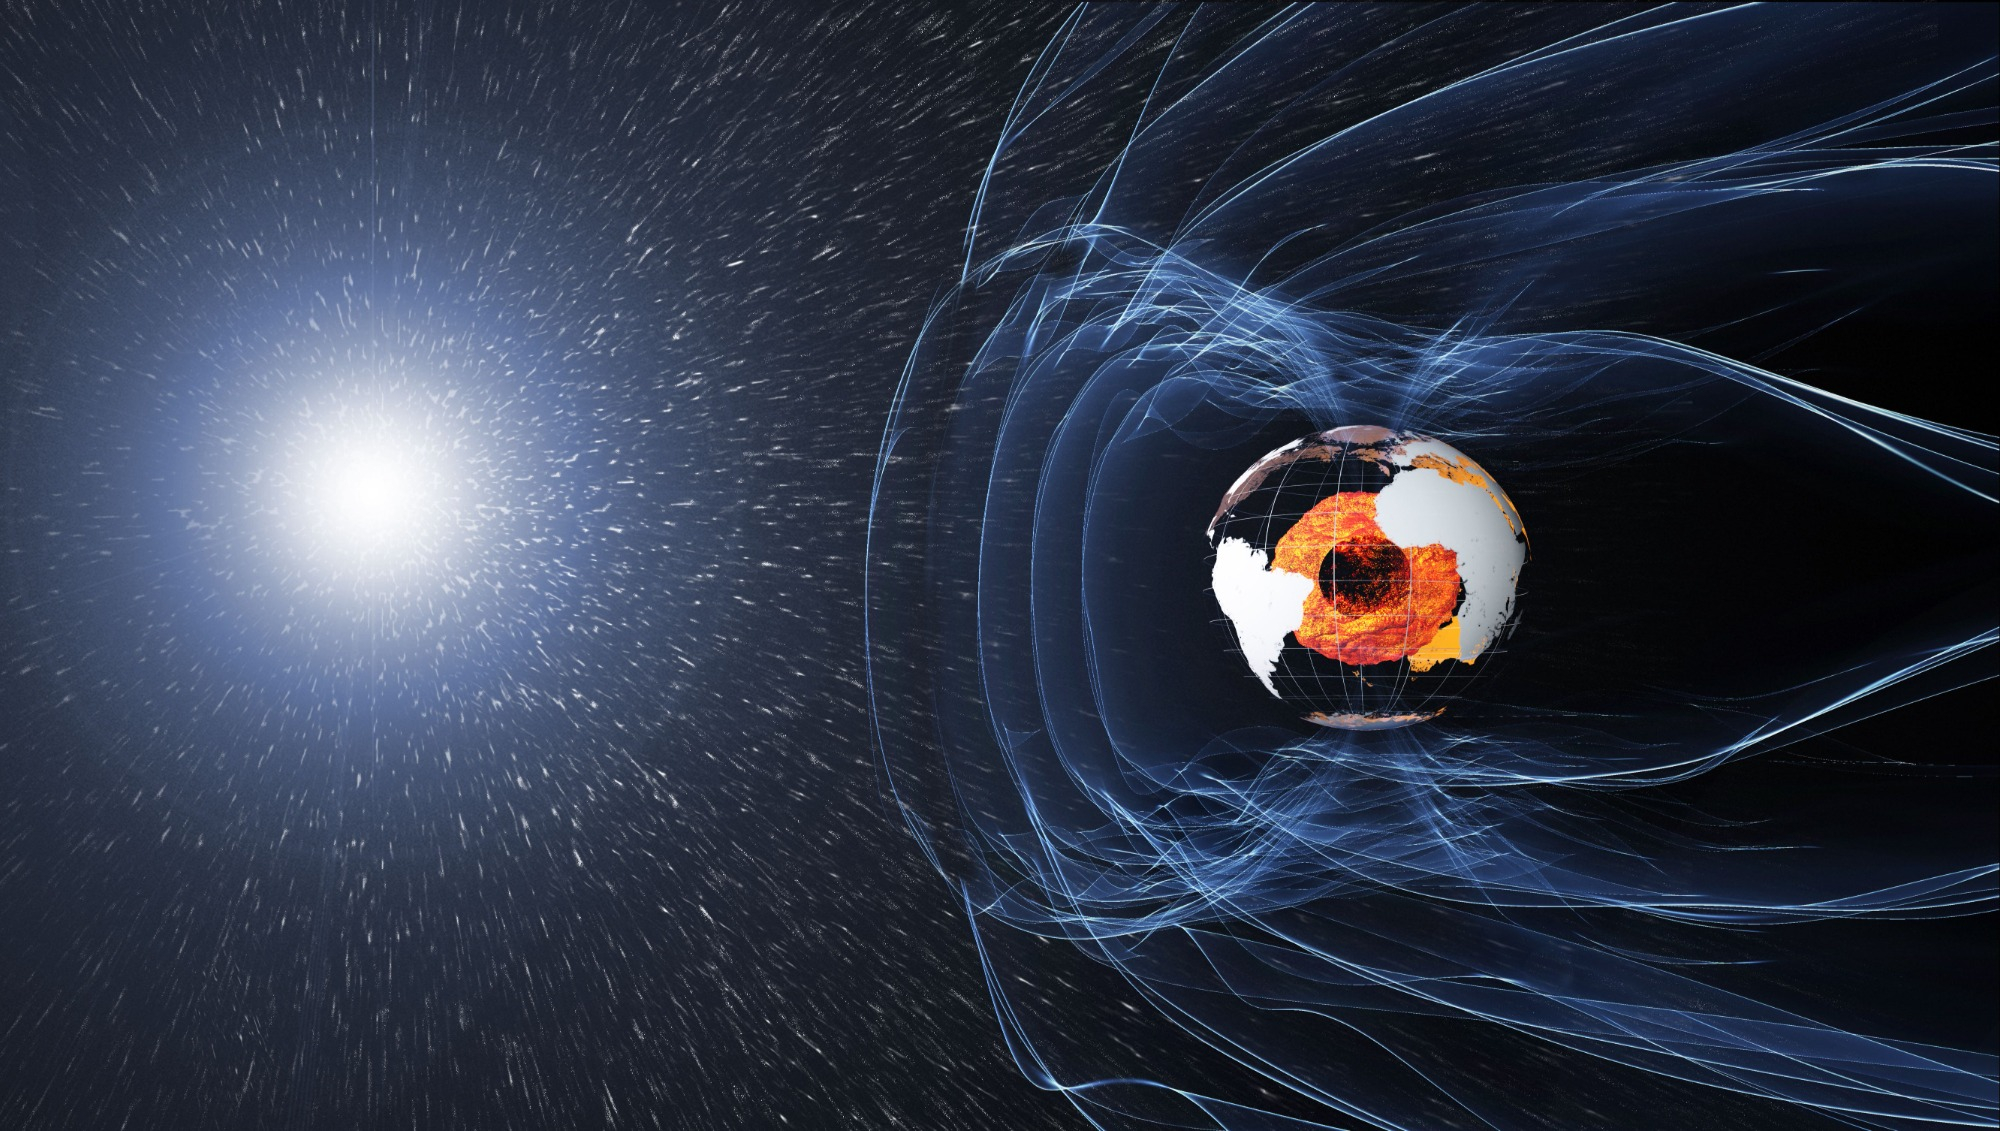 Earth's magnetic field in a black, red, and white illustration